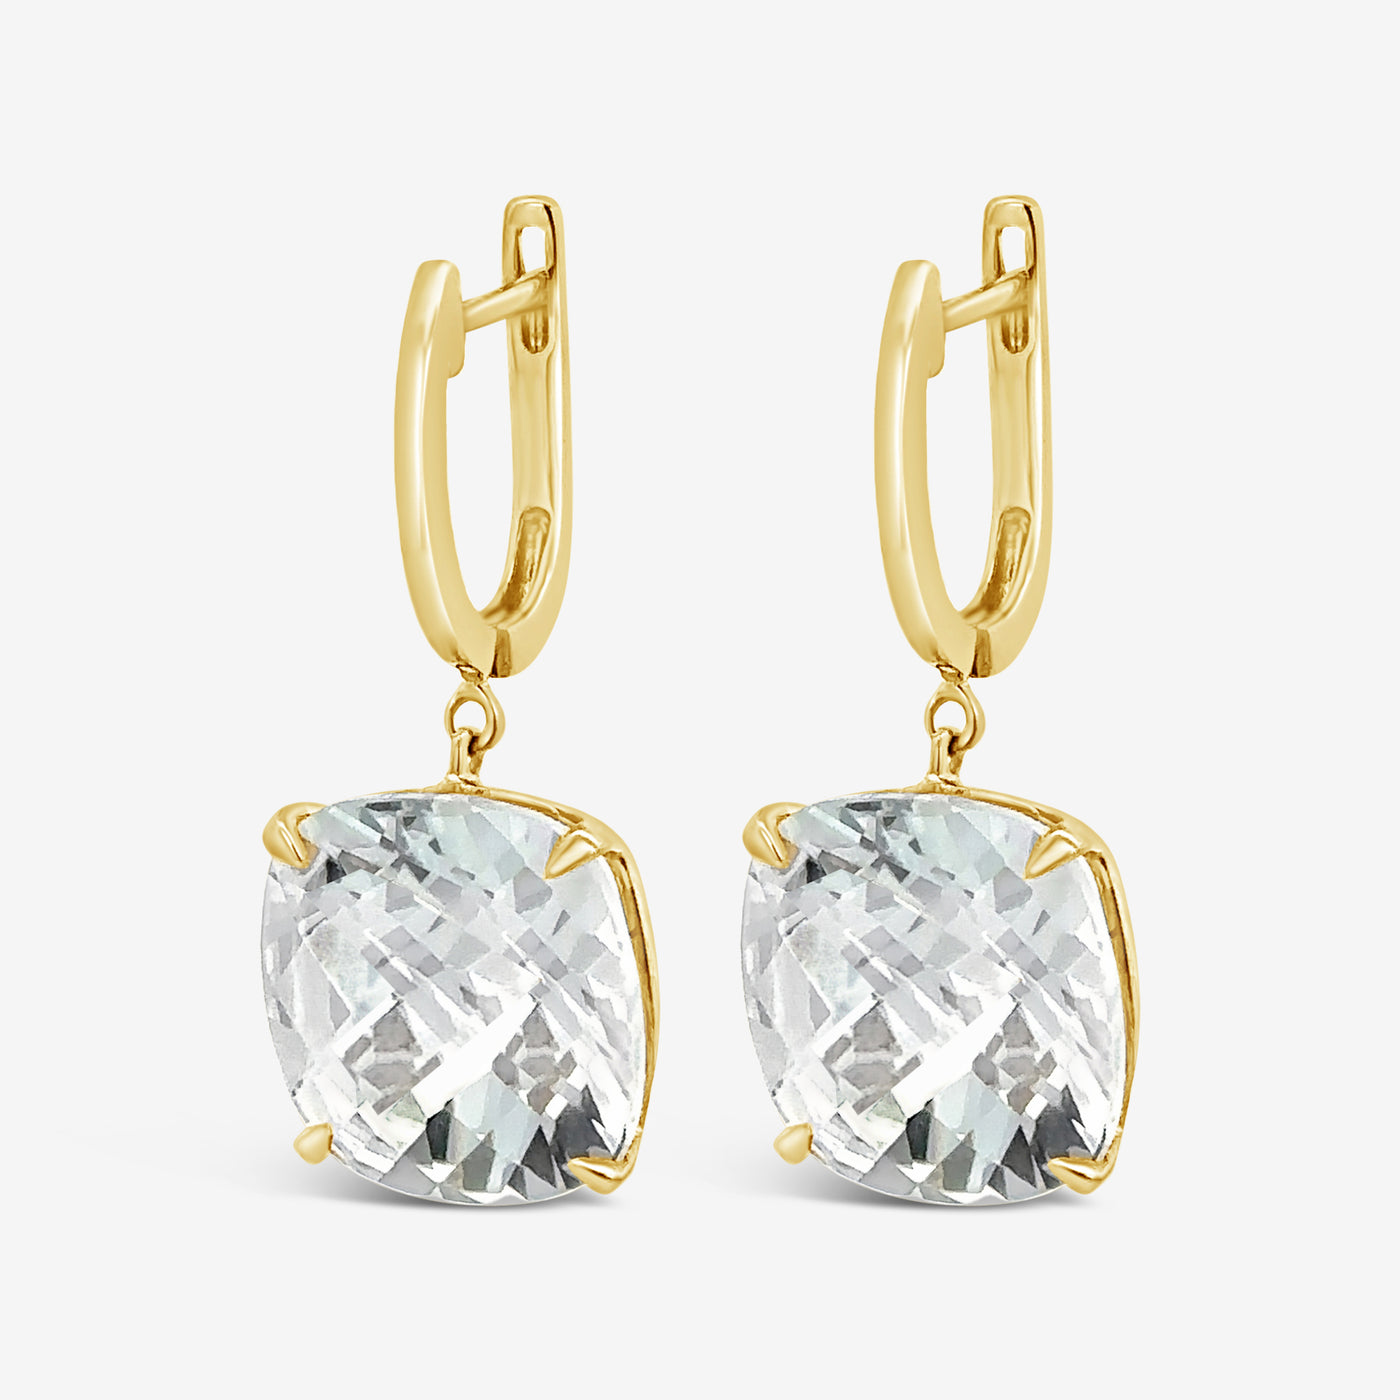 White Topaz Briolette Collection Earrings